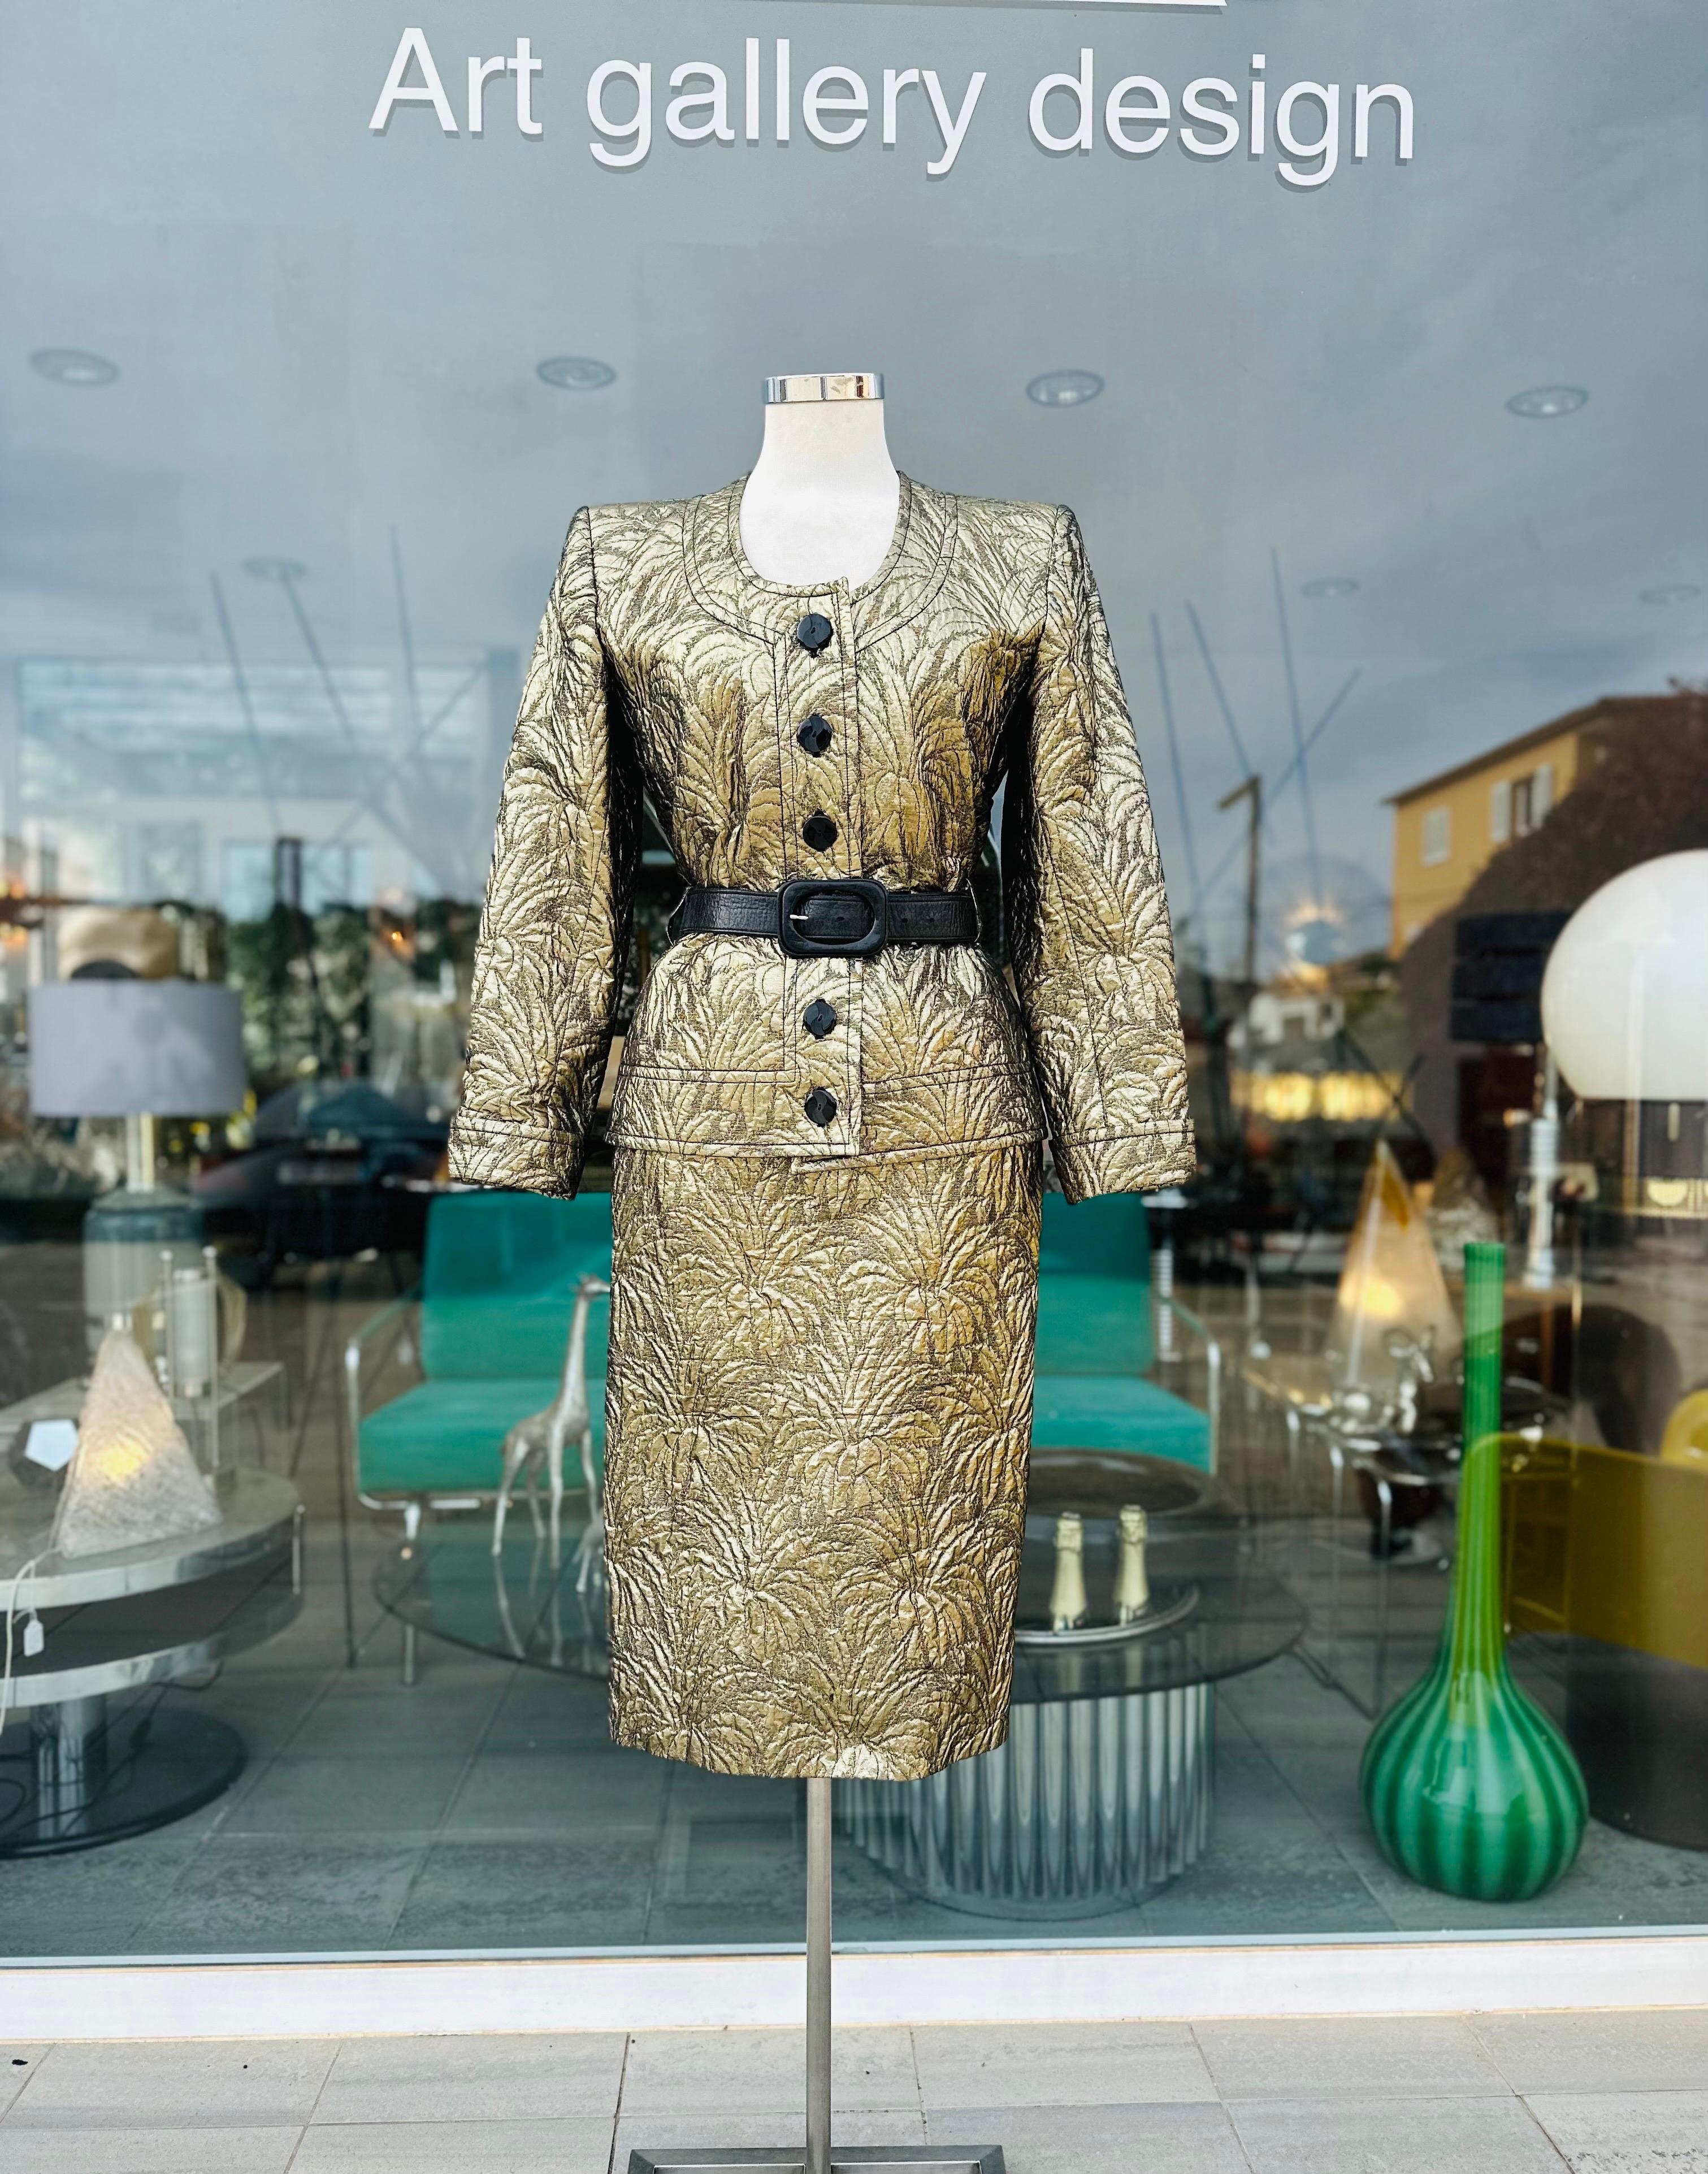 Yves saint Laurent rive gauche gold brocarde jacket and skirt set (F/W 86)
The jacket is slightly shouldered, with a round collar and pretty black buttons.
Belt loops.
The skirt, high-waisted, narrow
Zipper on the left hip ending in a